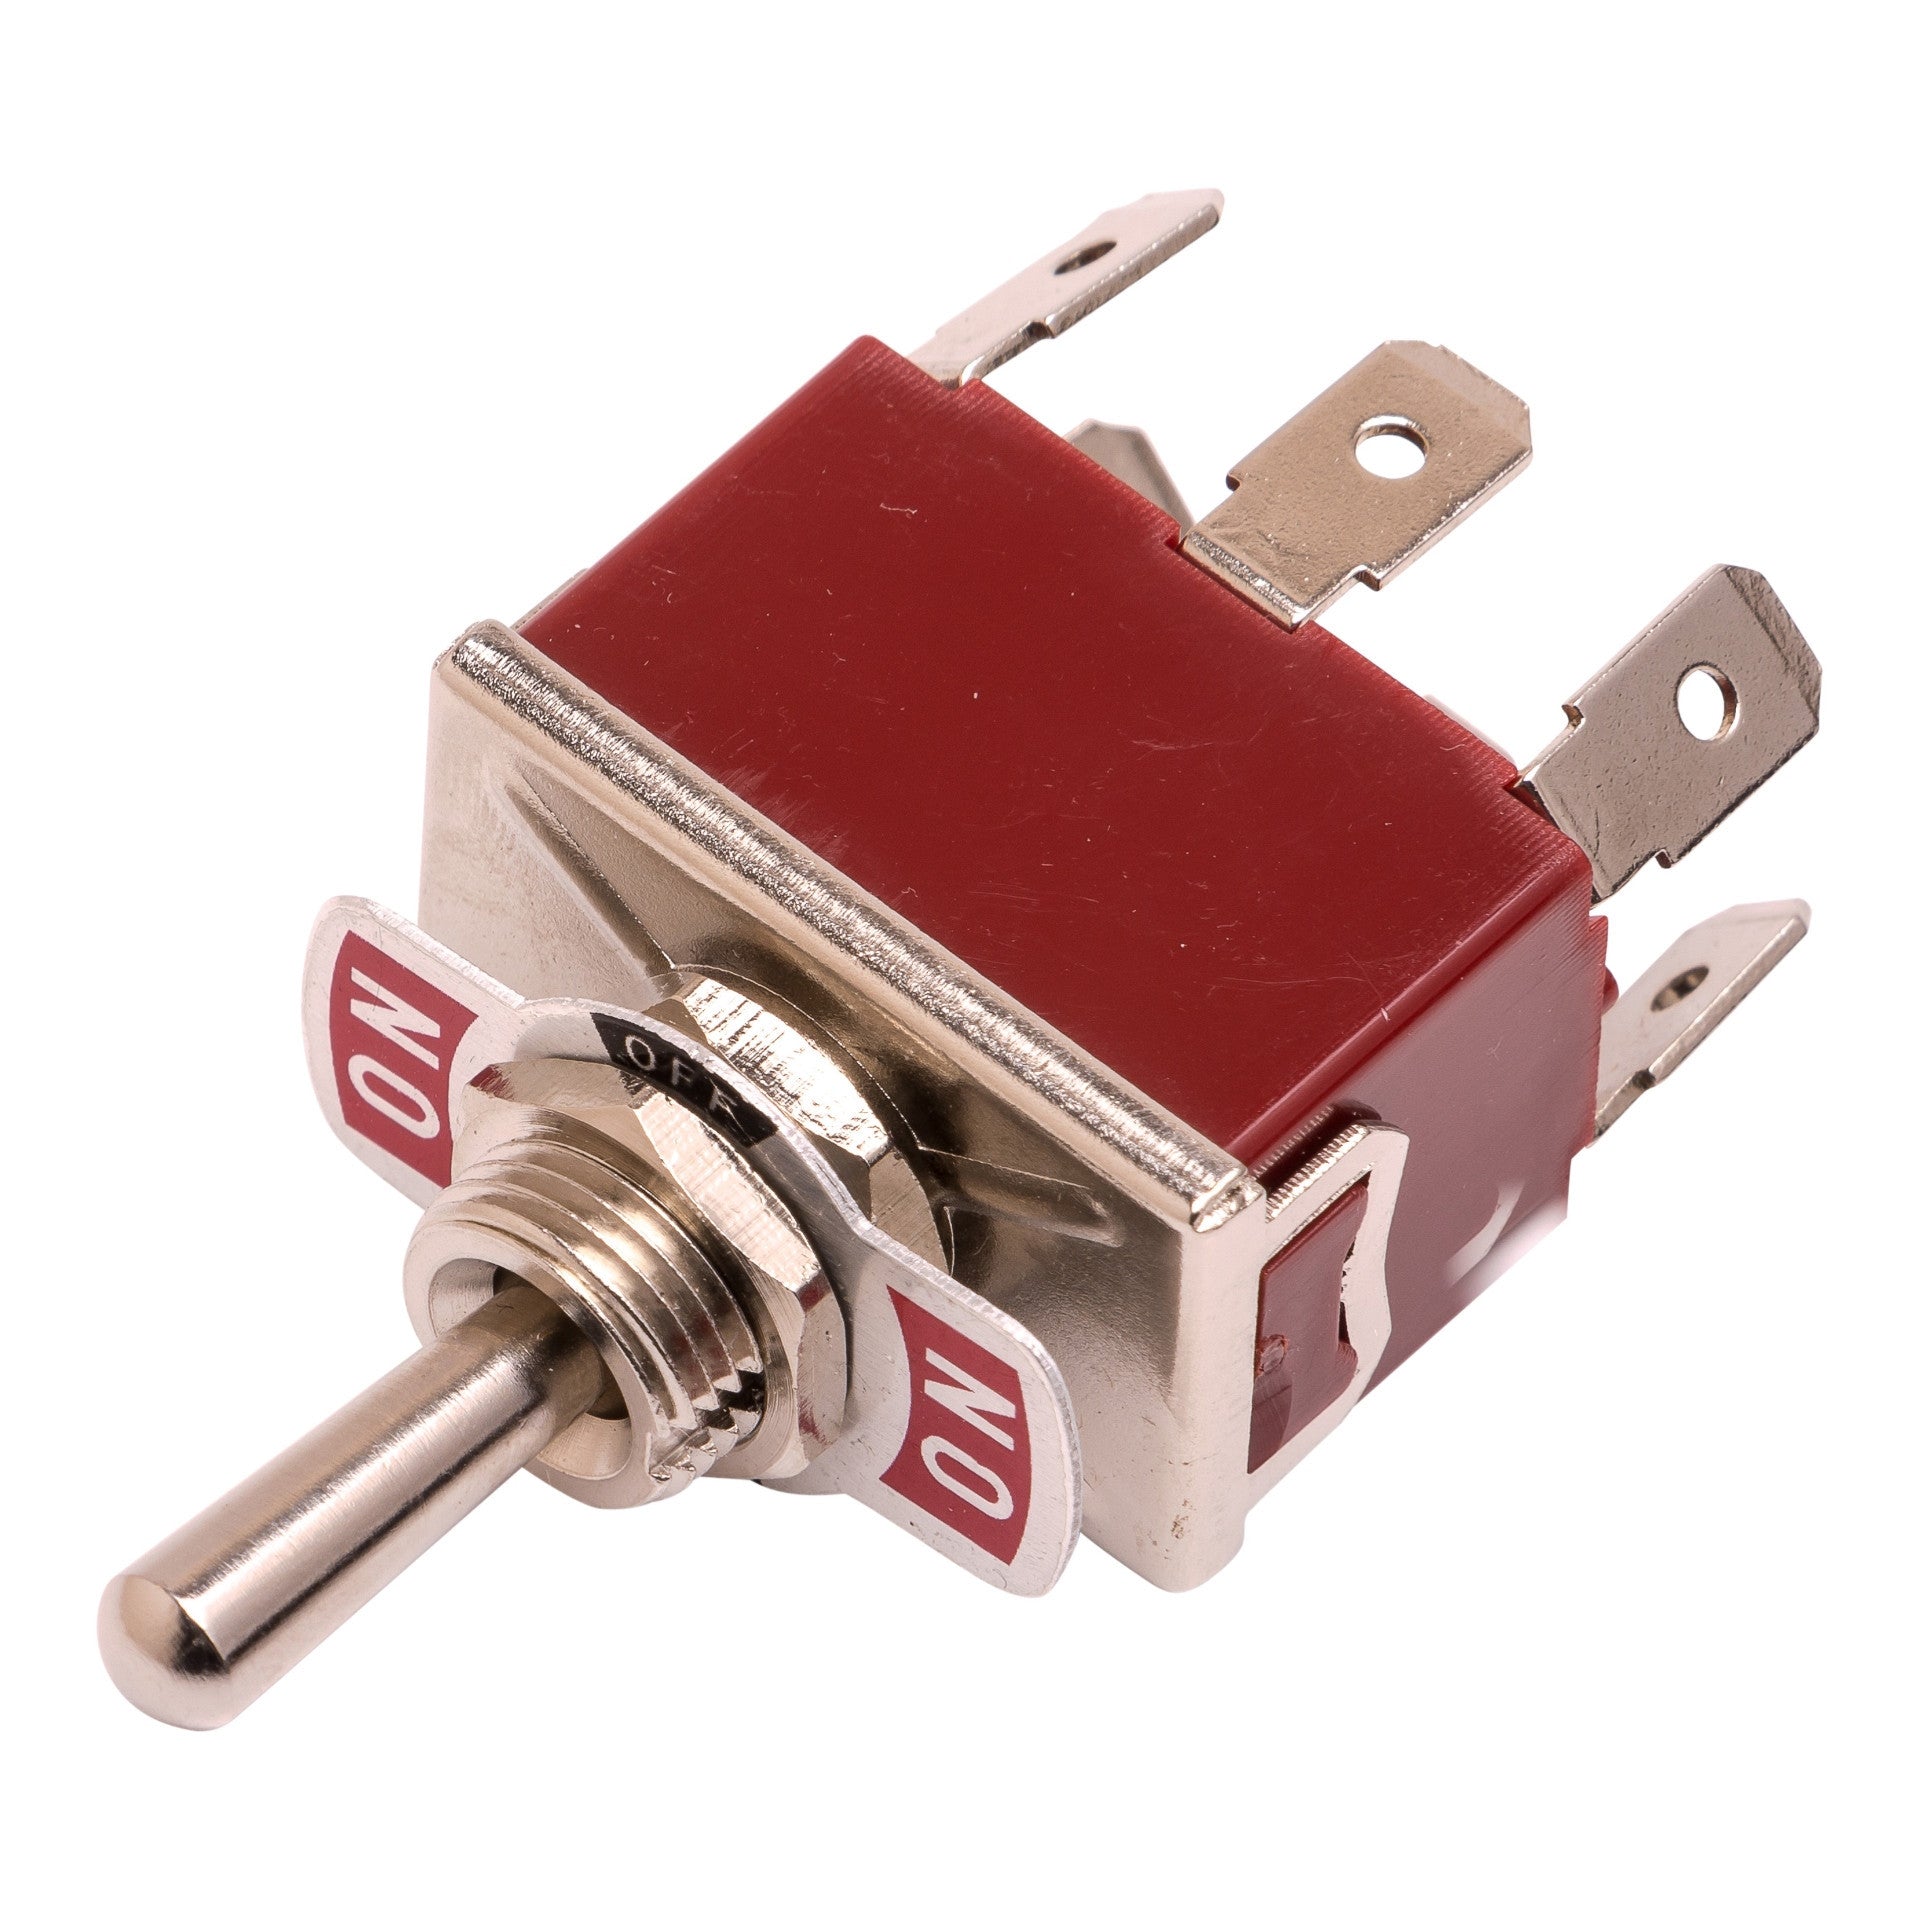 Toggle Switch for Actuators or Motors (DPDT) Product Image